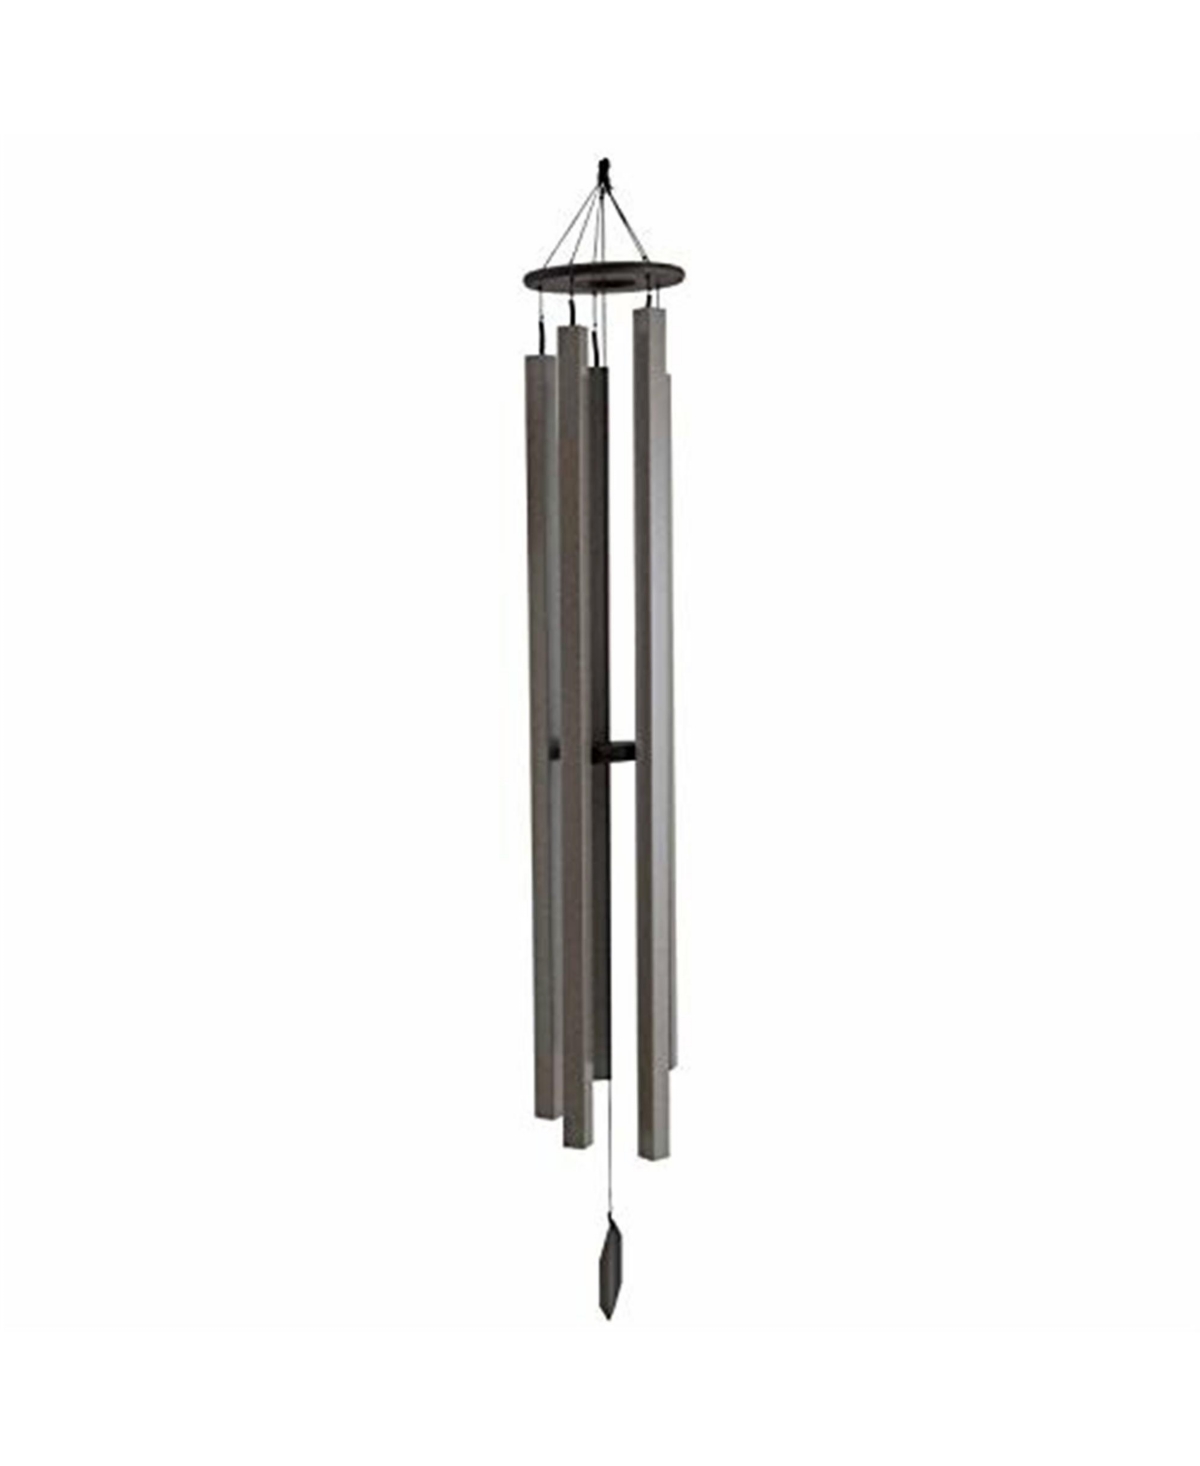 73 Sunsetter Wind Chime Amish Crafted Chime - Multi